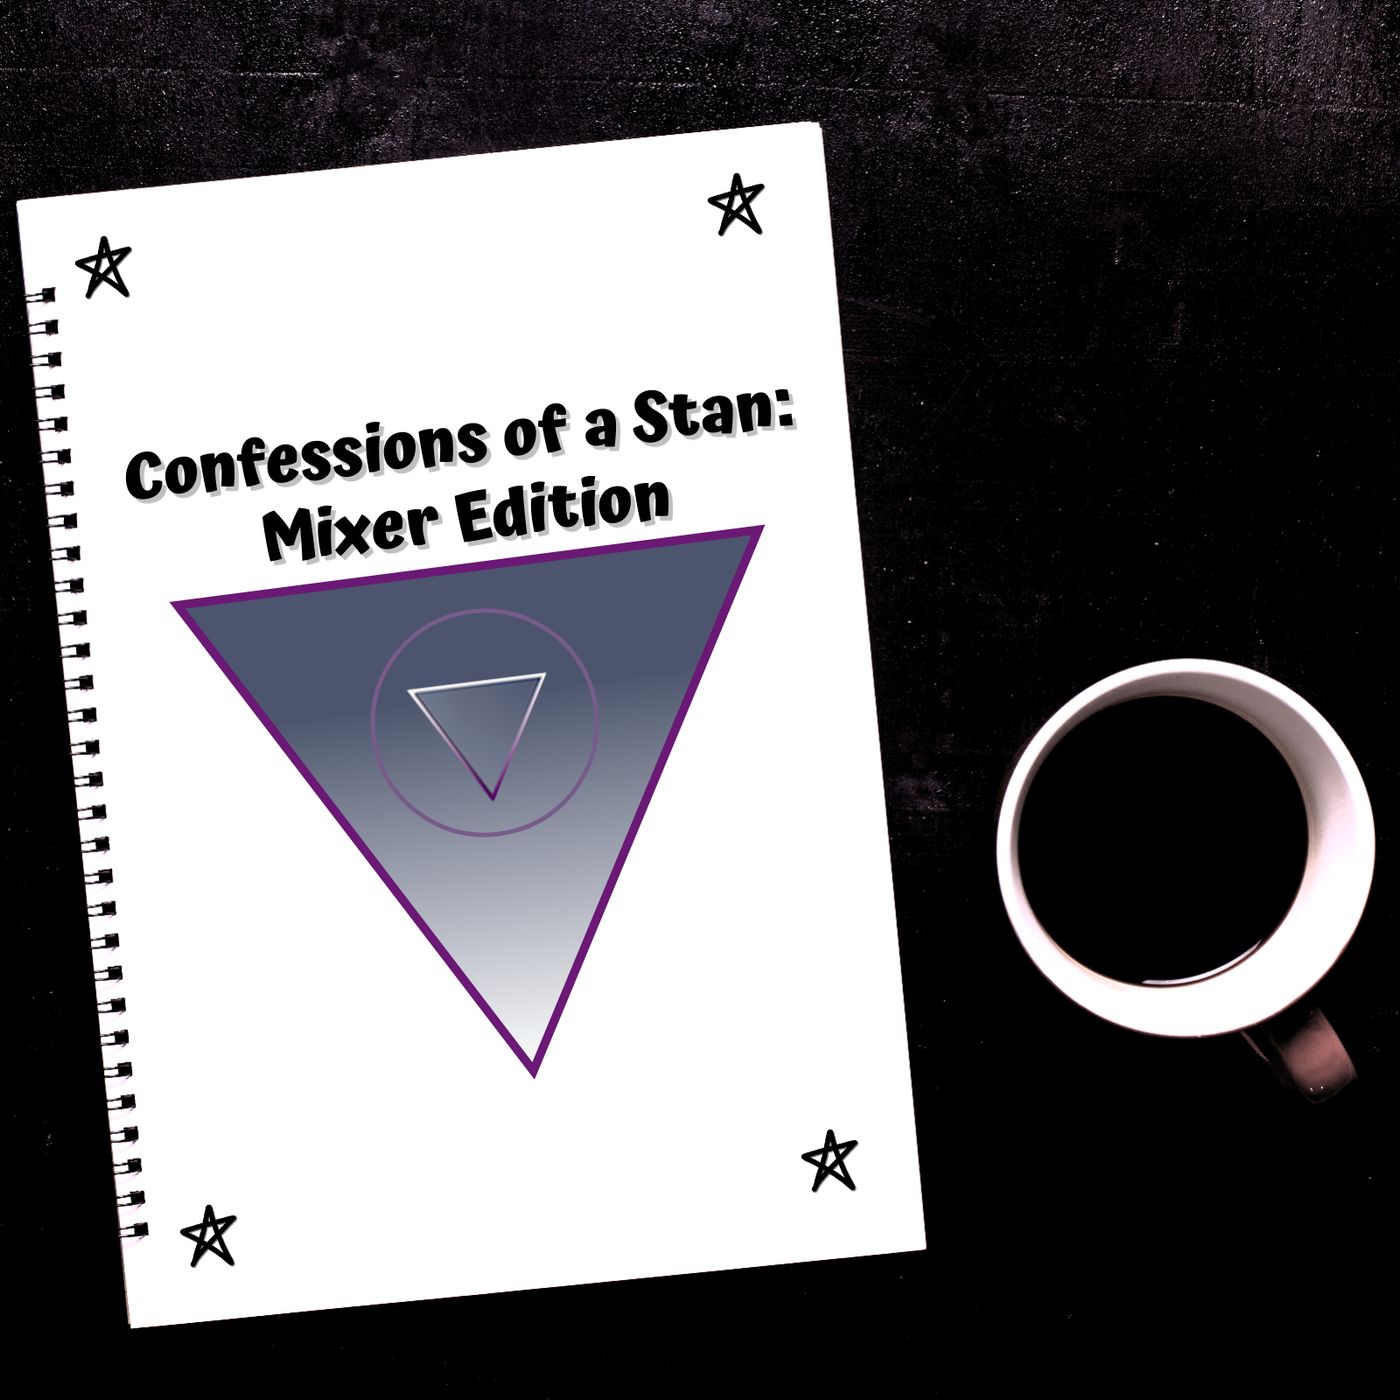 Confessions of a Stan: Mixer Edition